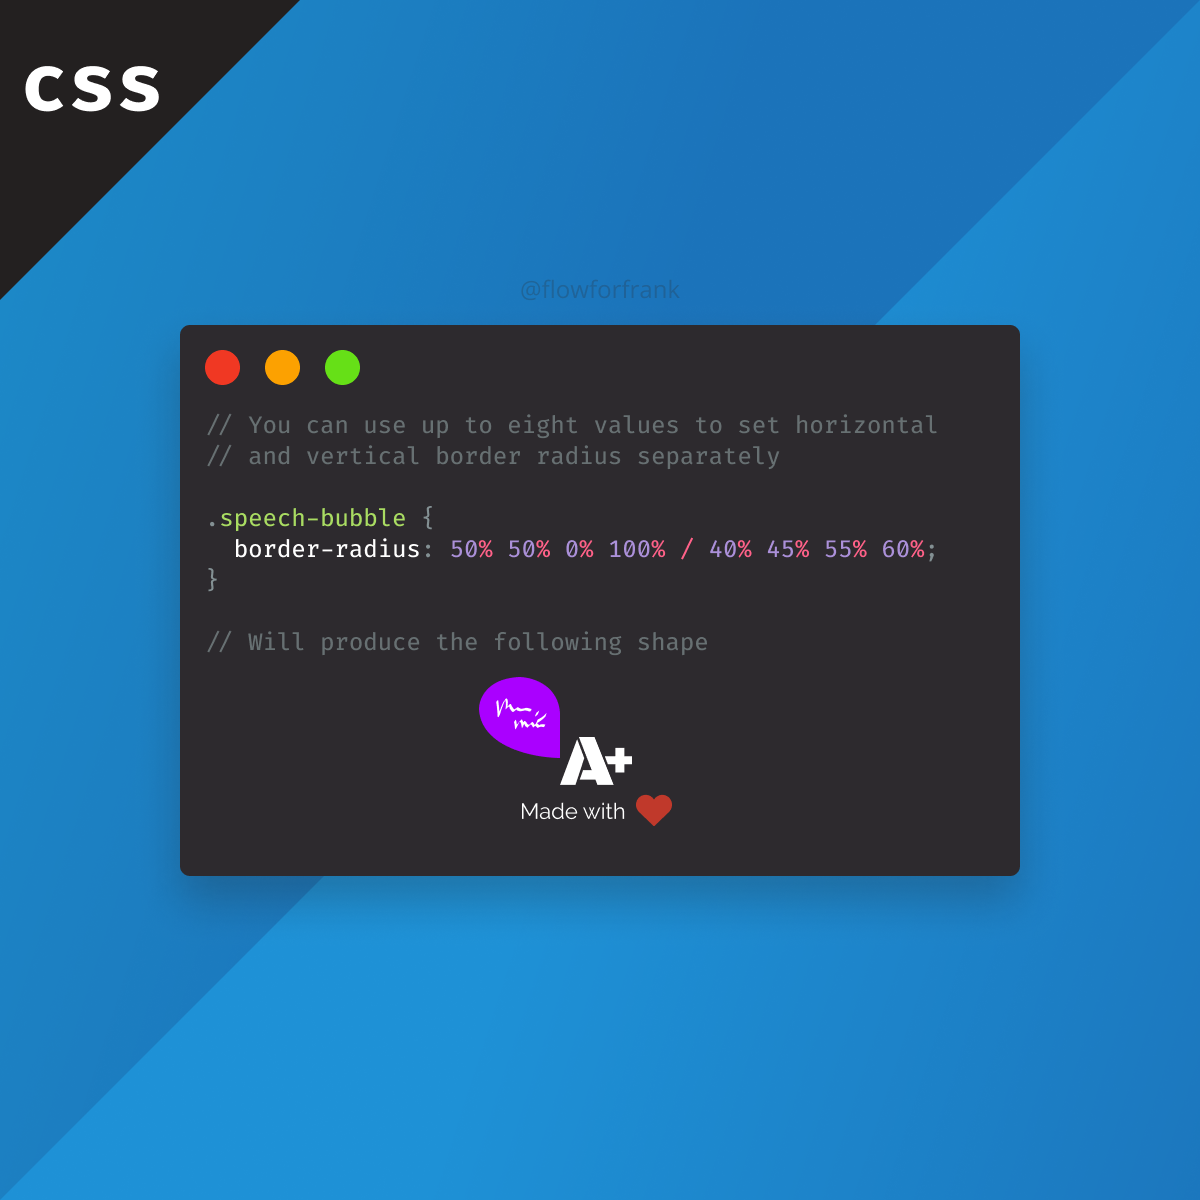 How to Make Speech Bubbles in CSS